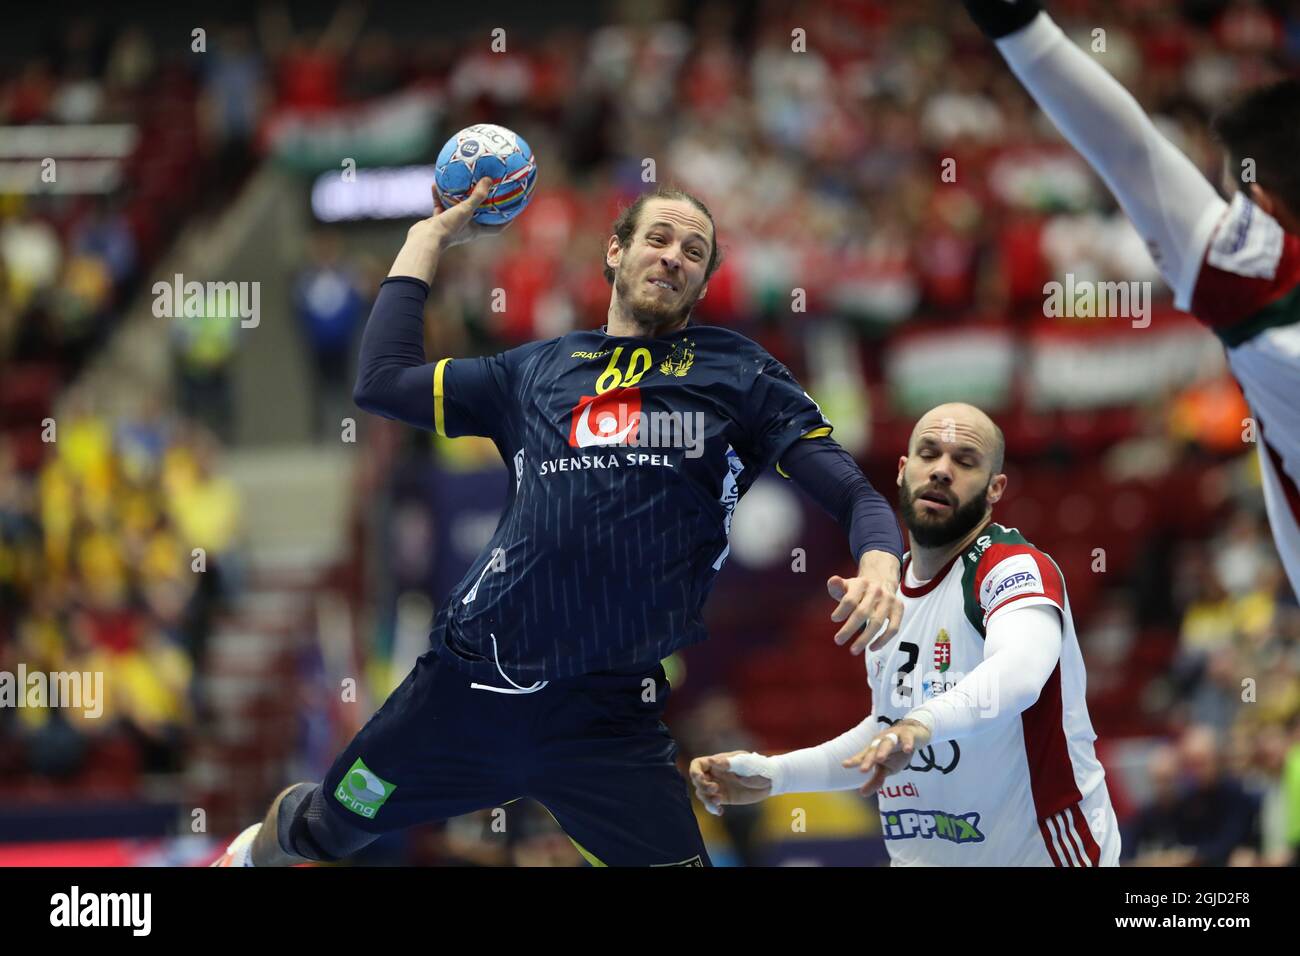 MALMO 20200121 Sweden's Kim Ekdahl du Rietz in action Adrian Sipos (R) during the Men's European Handball Championship main round Group 2 match between Hungary and Sweden at Malmo Arena, Tuesday Jan. 21, 2020. Photo Andreas Hillergren / TT kod 10600 Stock Photo